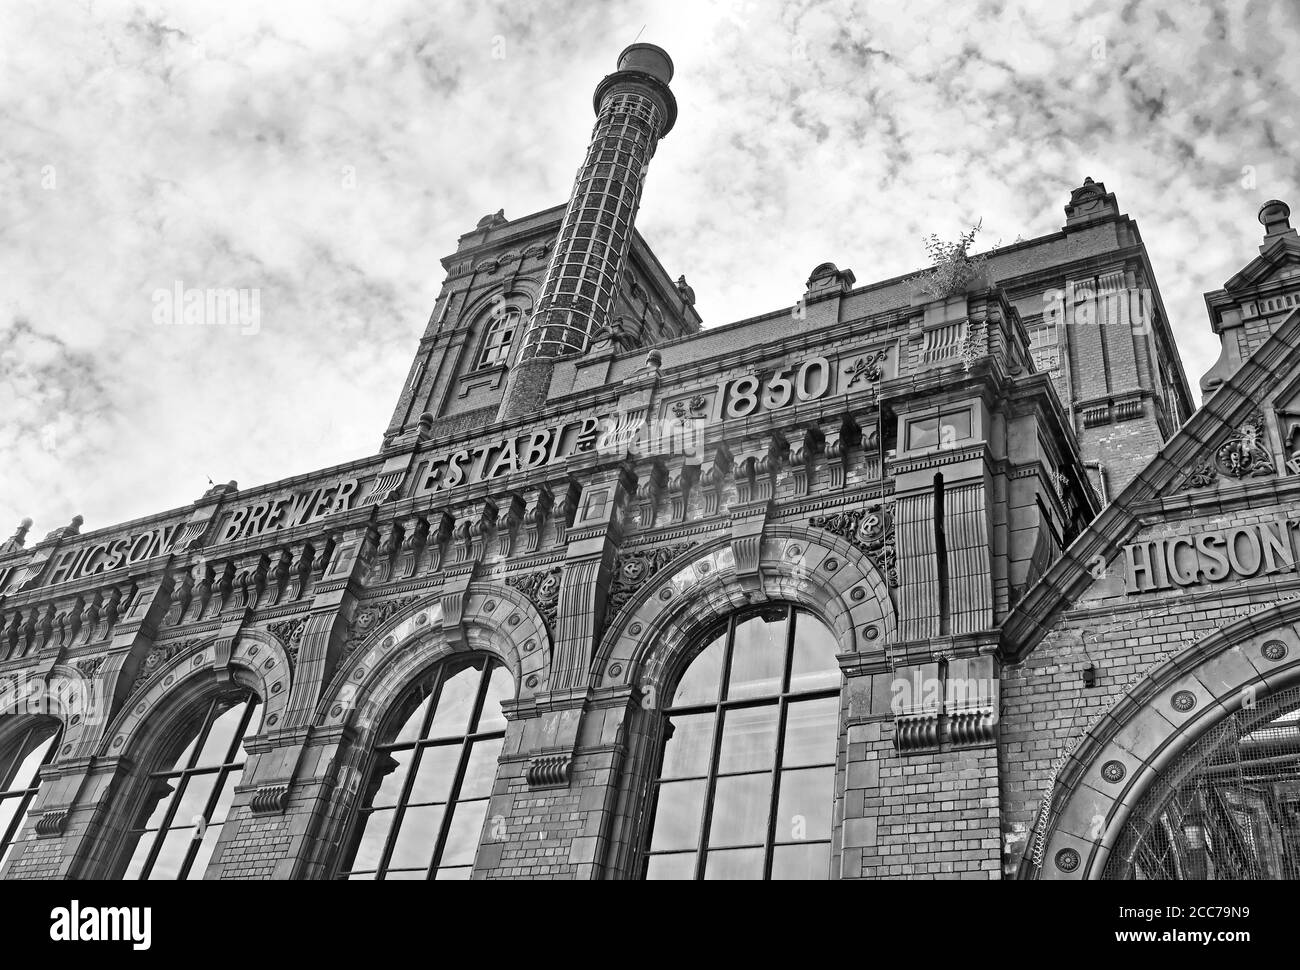 Higsons,Cains brewery, 39 Stanhope St, Liverpool, Merseyside, England, UK,  L8 5RE, Black and White,Monochrome Stock Photo